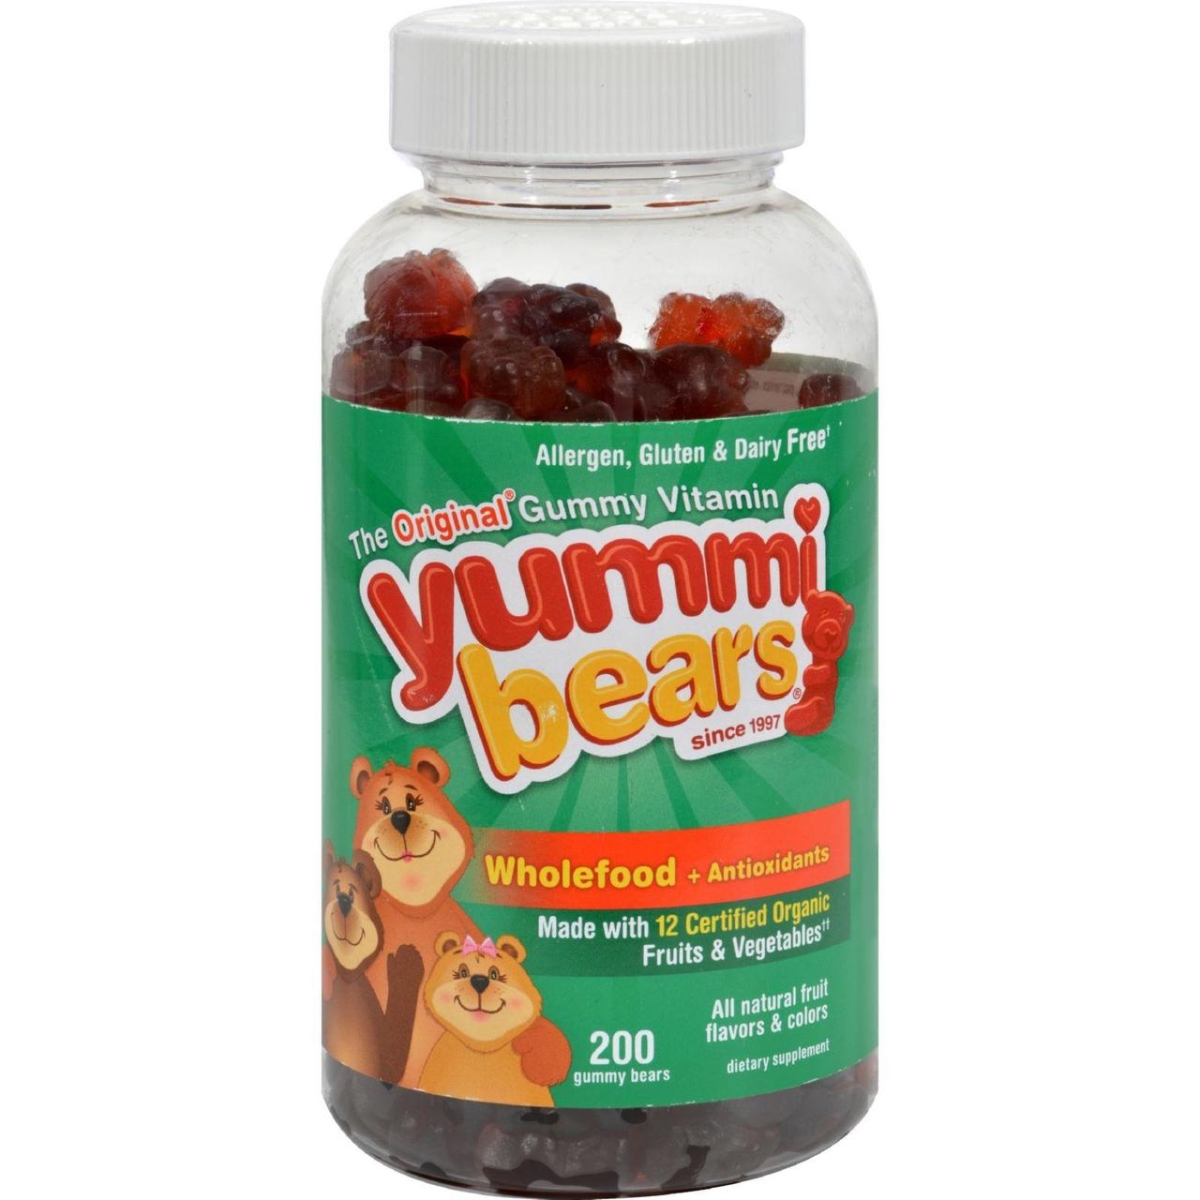 Hg0394270 Yummi Bears Whole Food Supplement For Kids - 200 Chewables